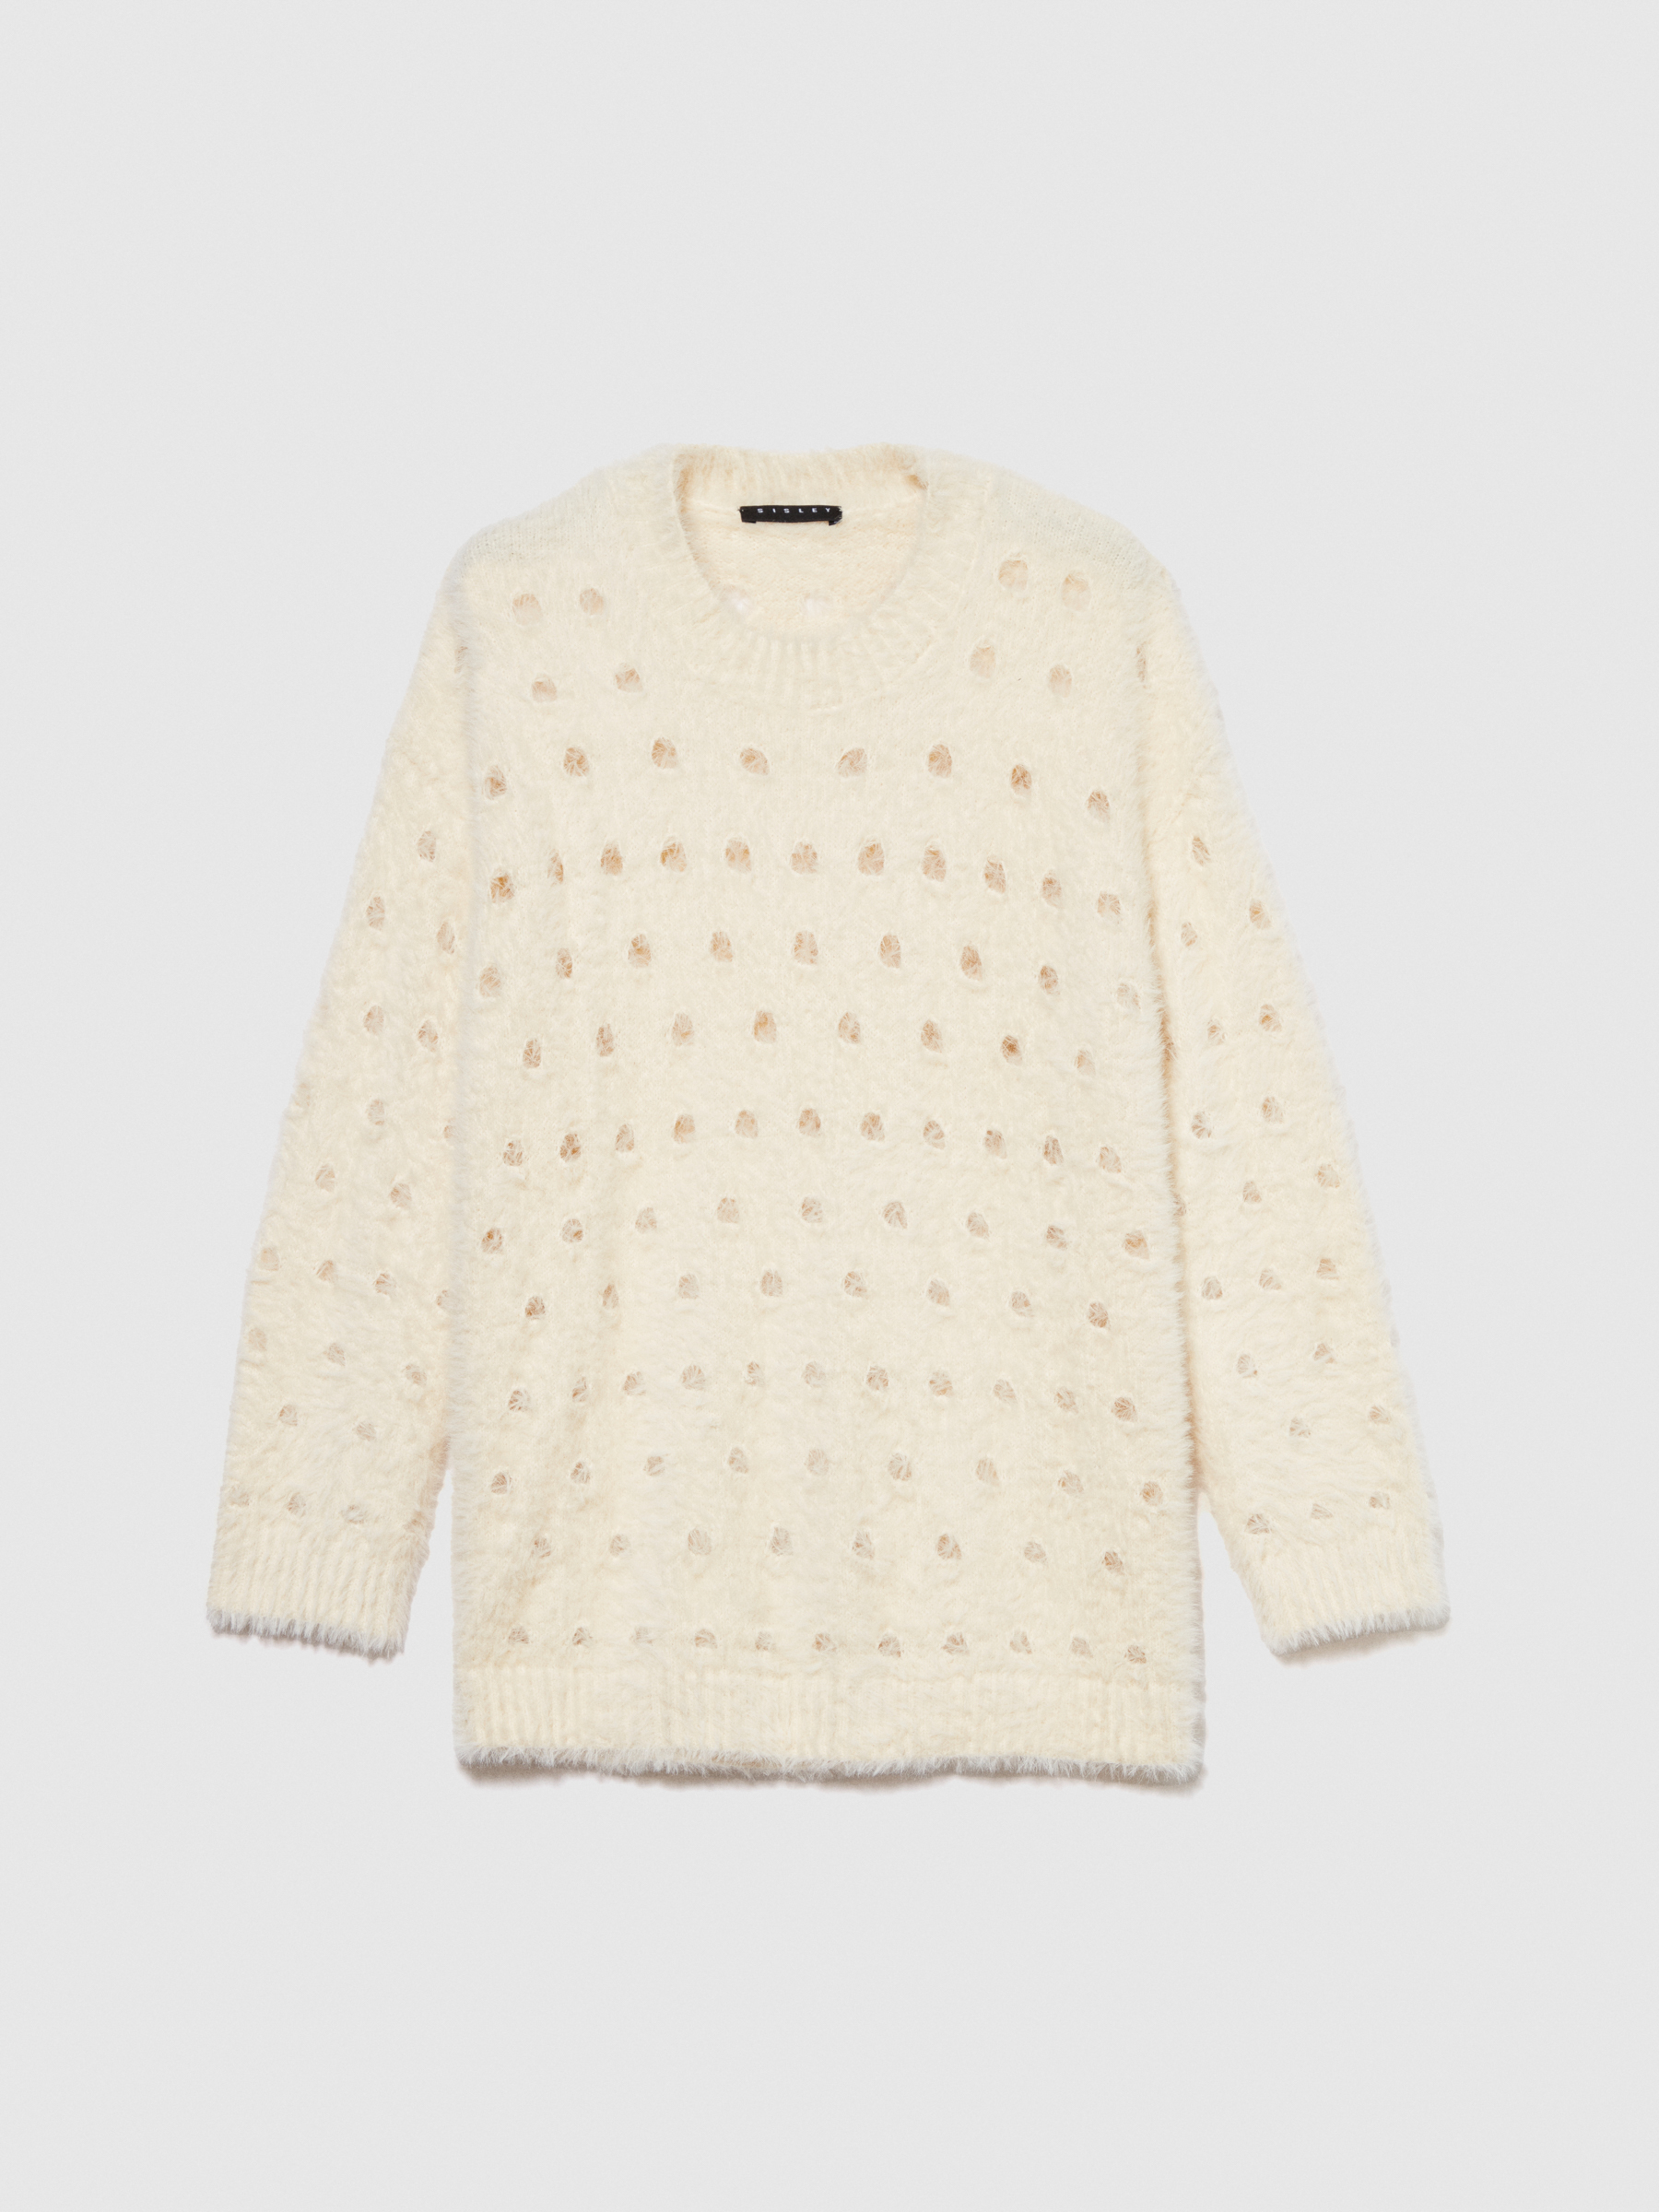 Sisley Young - Fluffy Open-knit Sweater, Woman, Creamy White, Size: EL